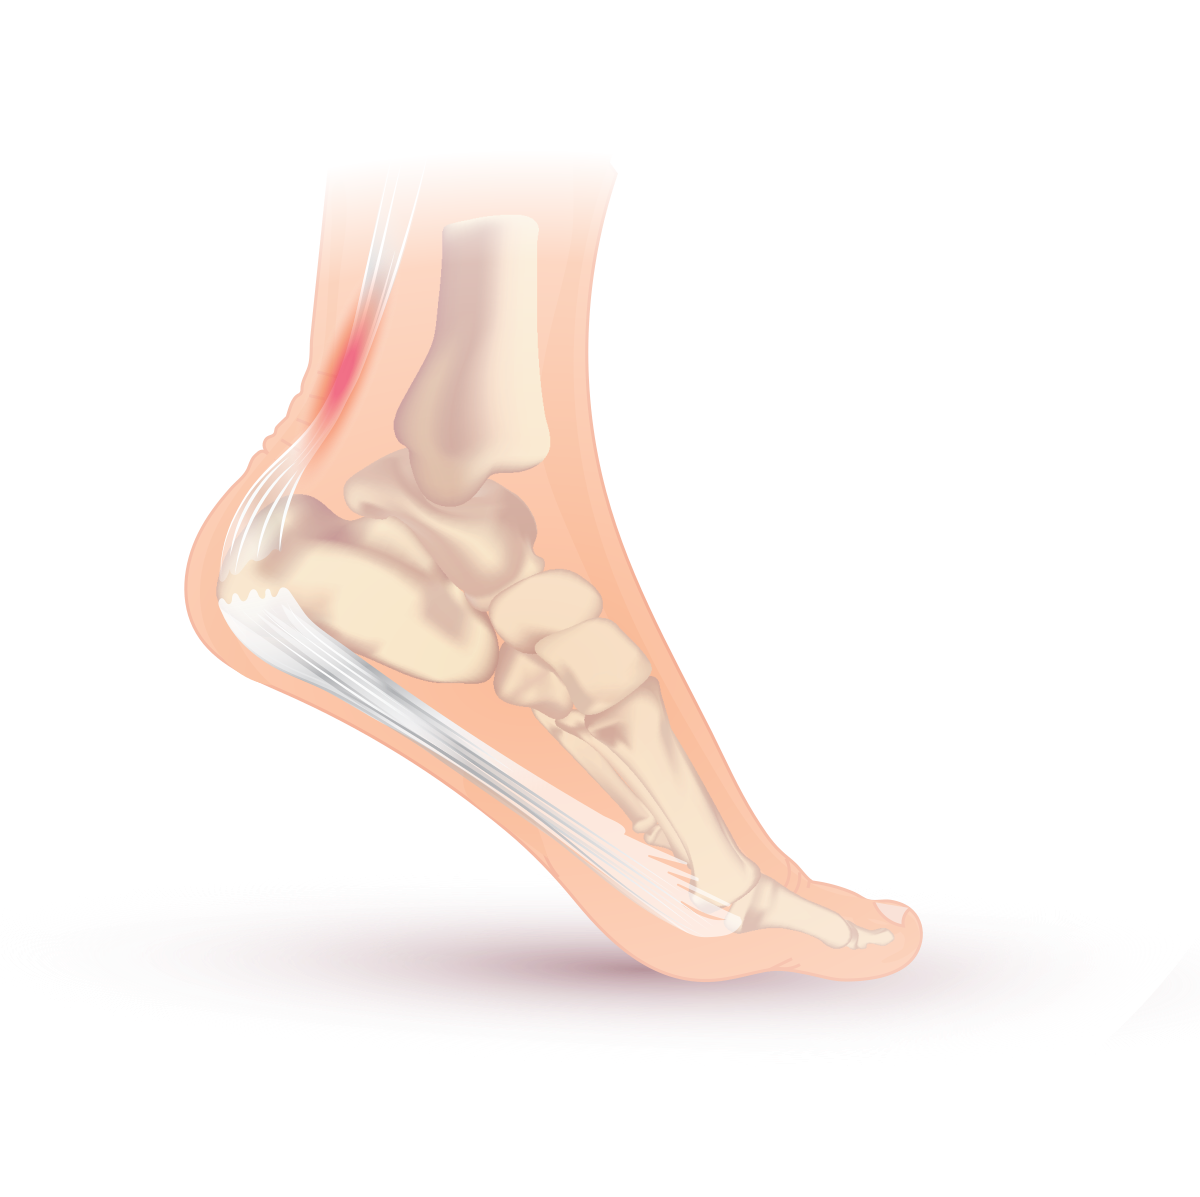 Insertional Achilles Tendonitis Treatment and Symptoms – Medical Wave